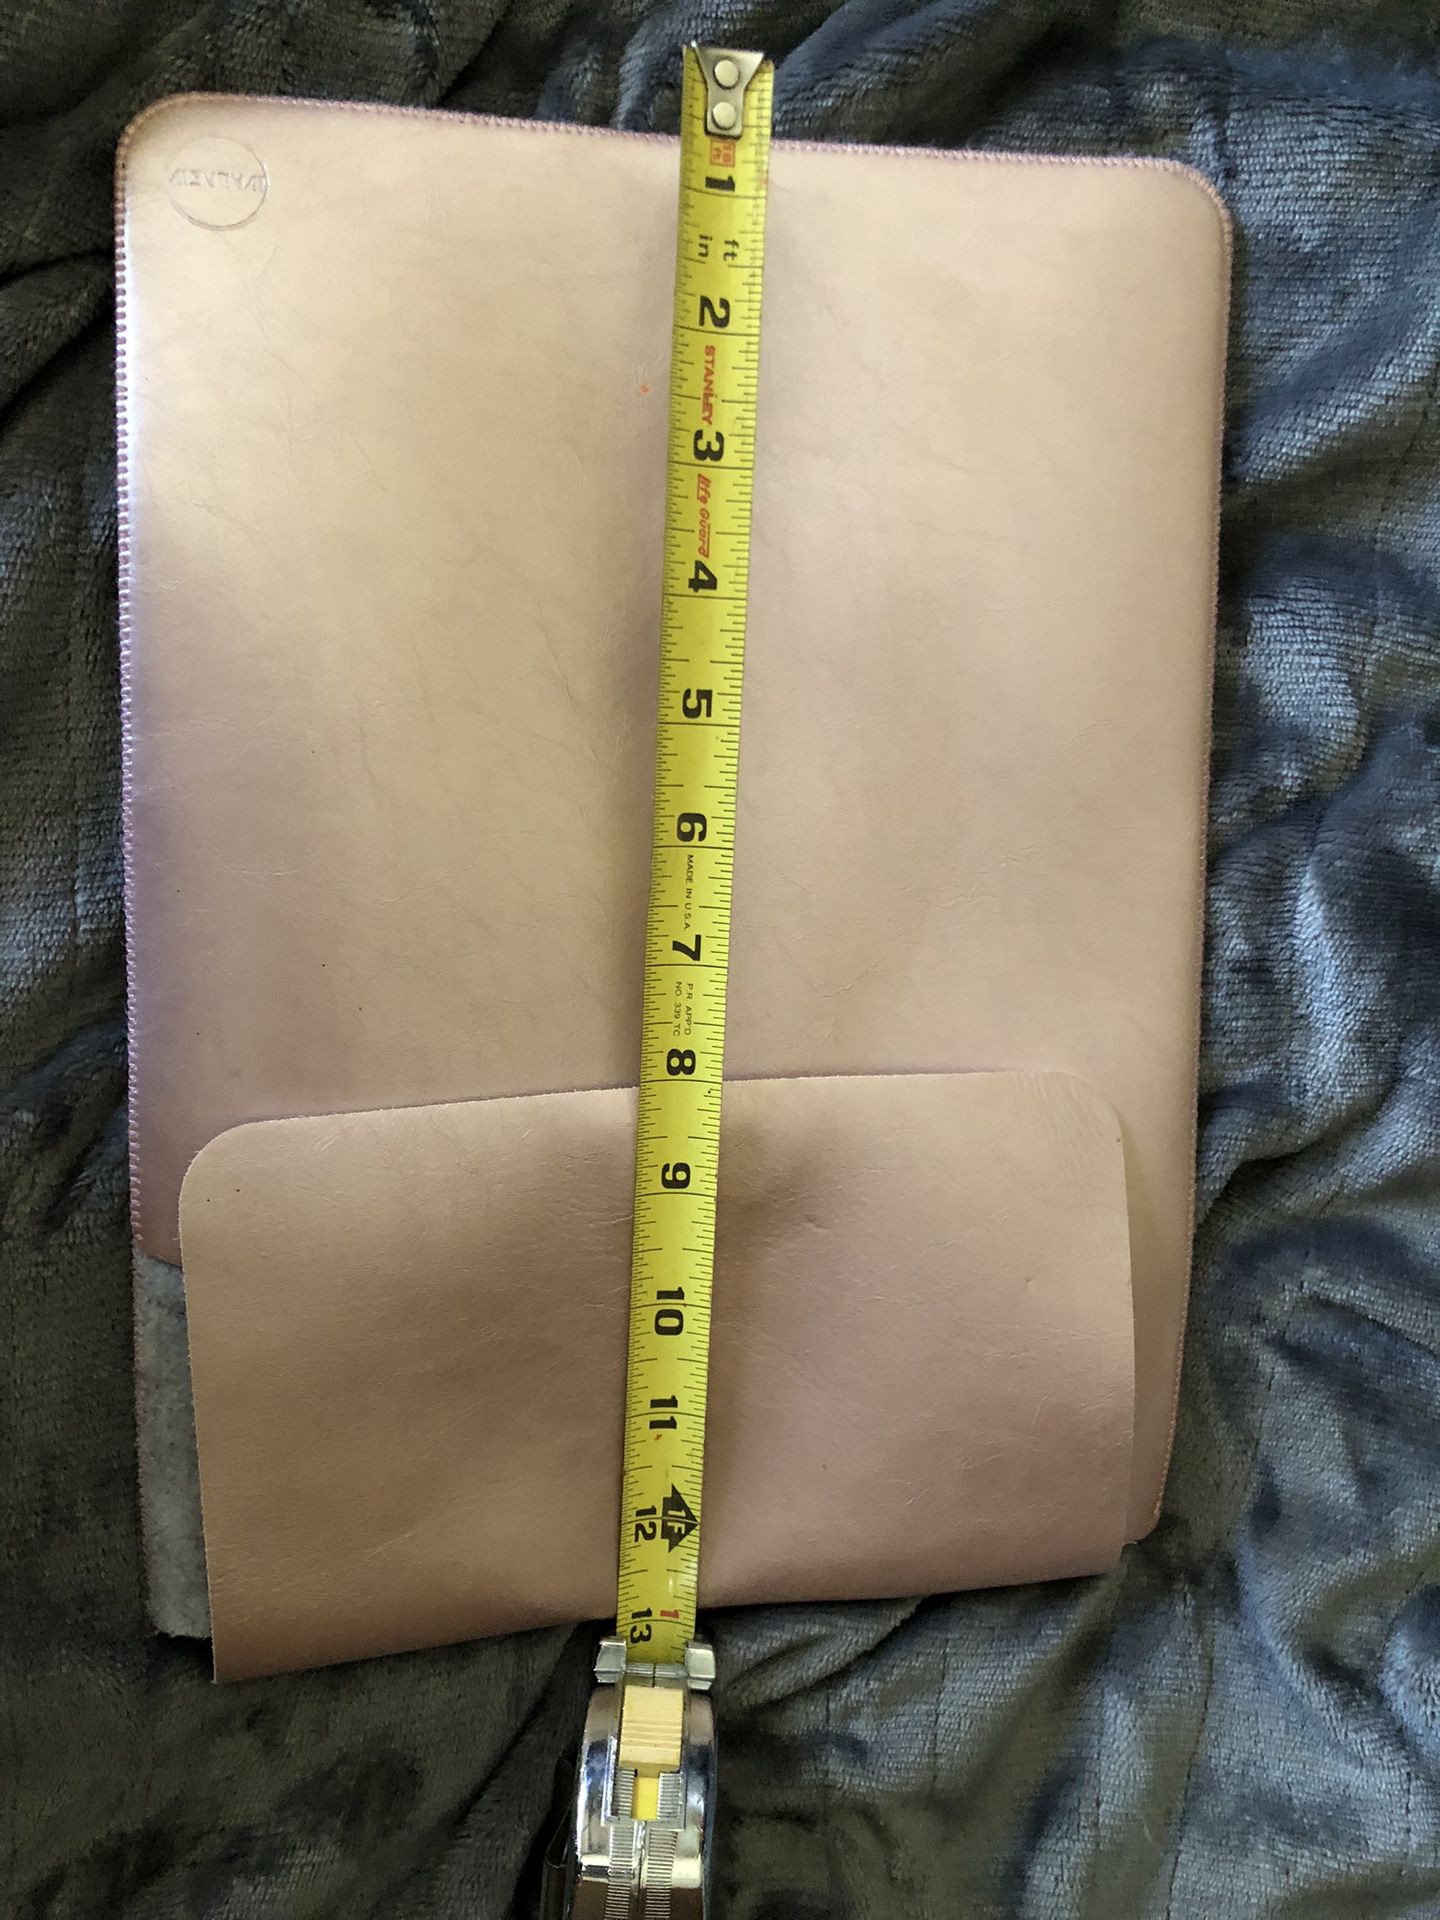 $2 Pearl Pink iPad Or Small Laptop Case